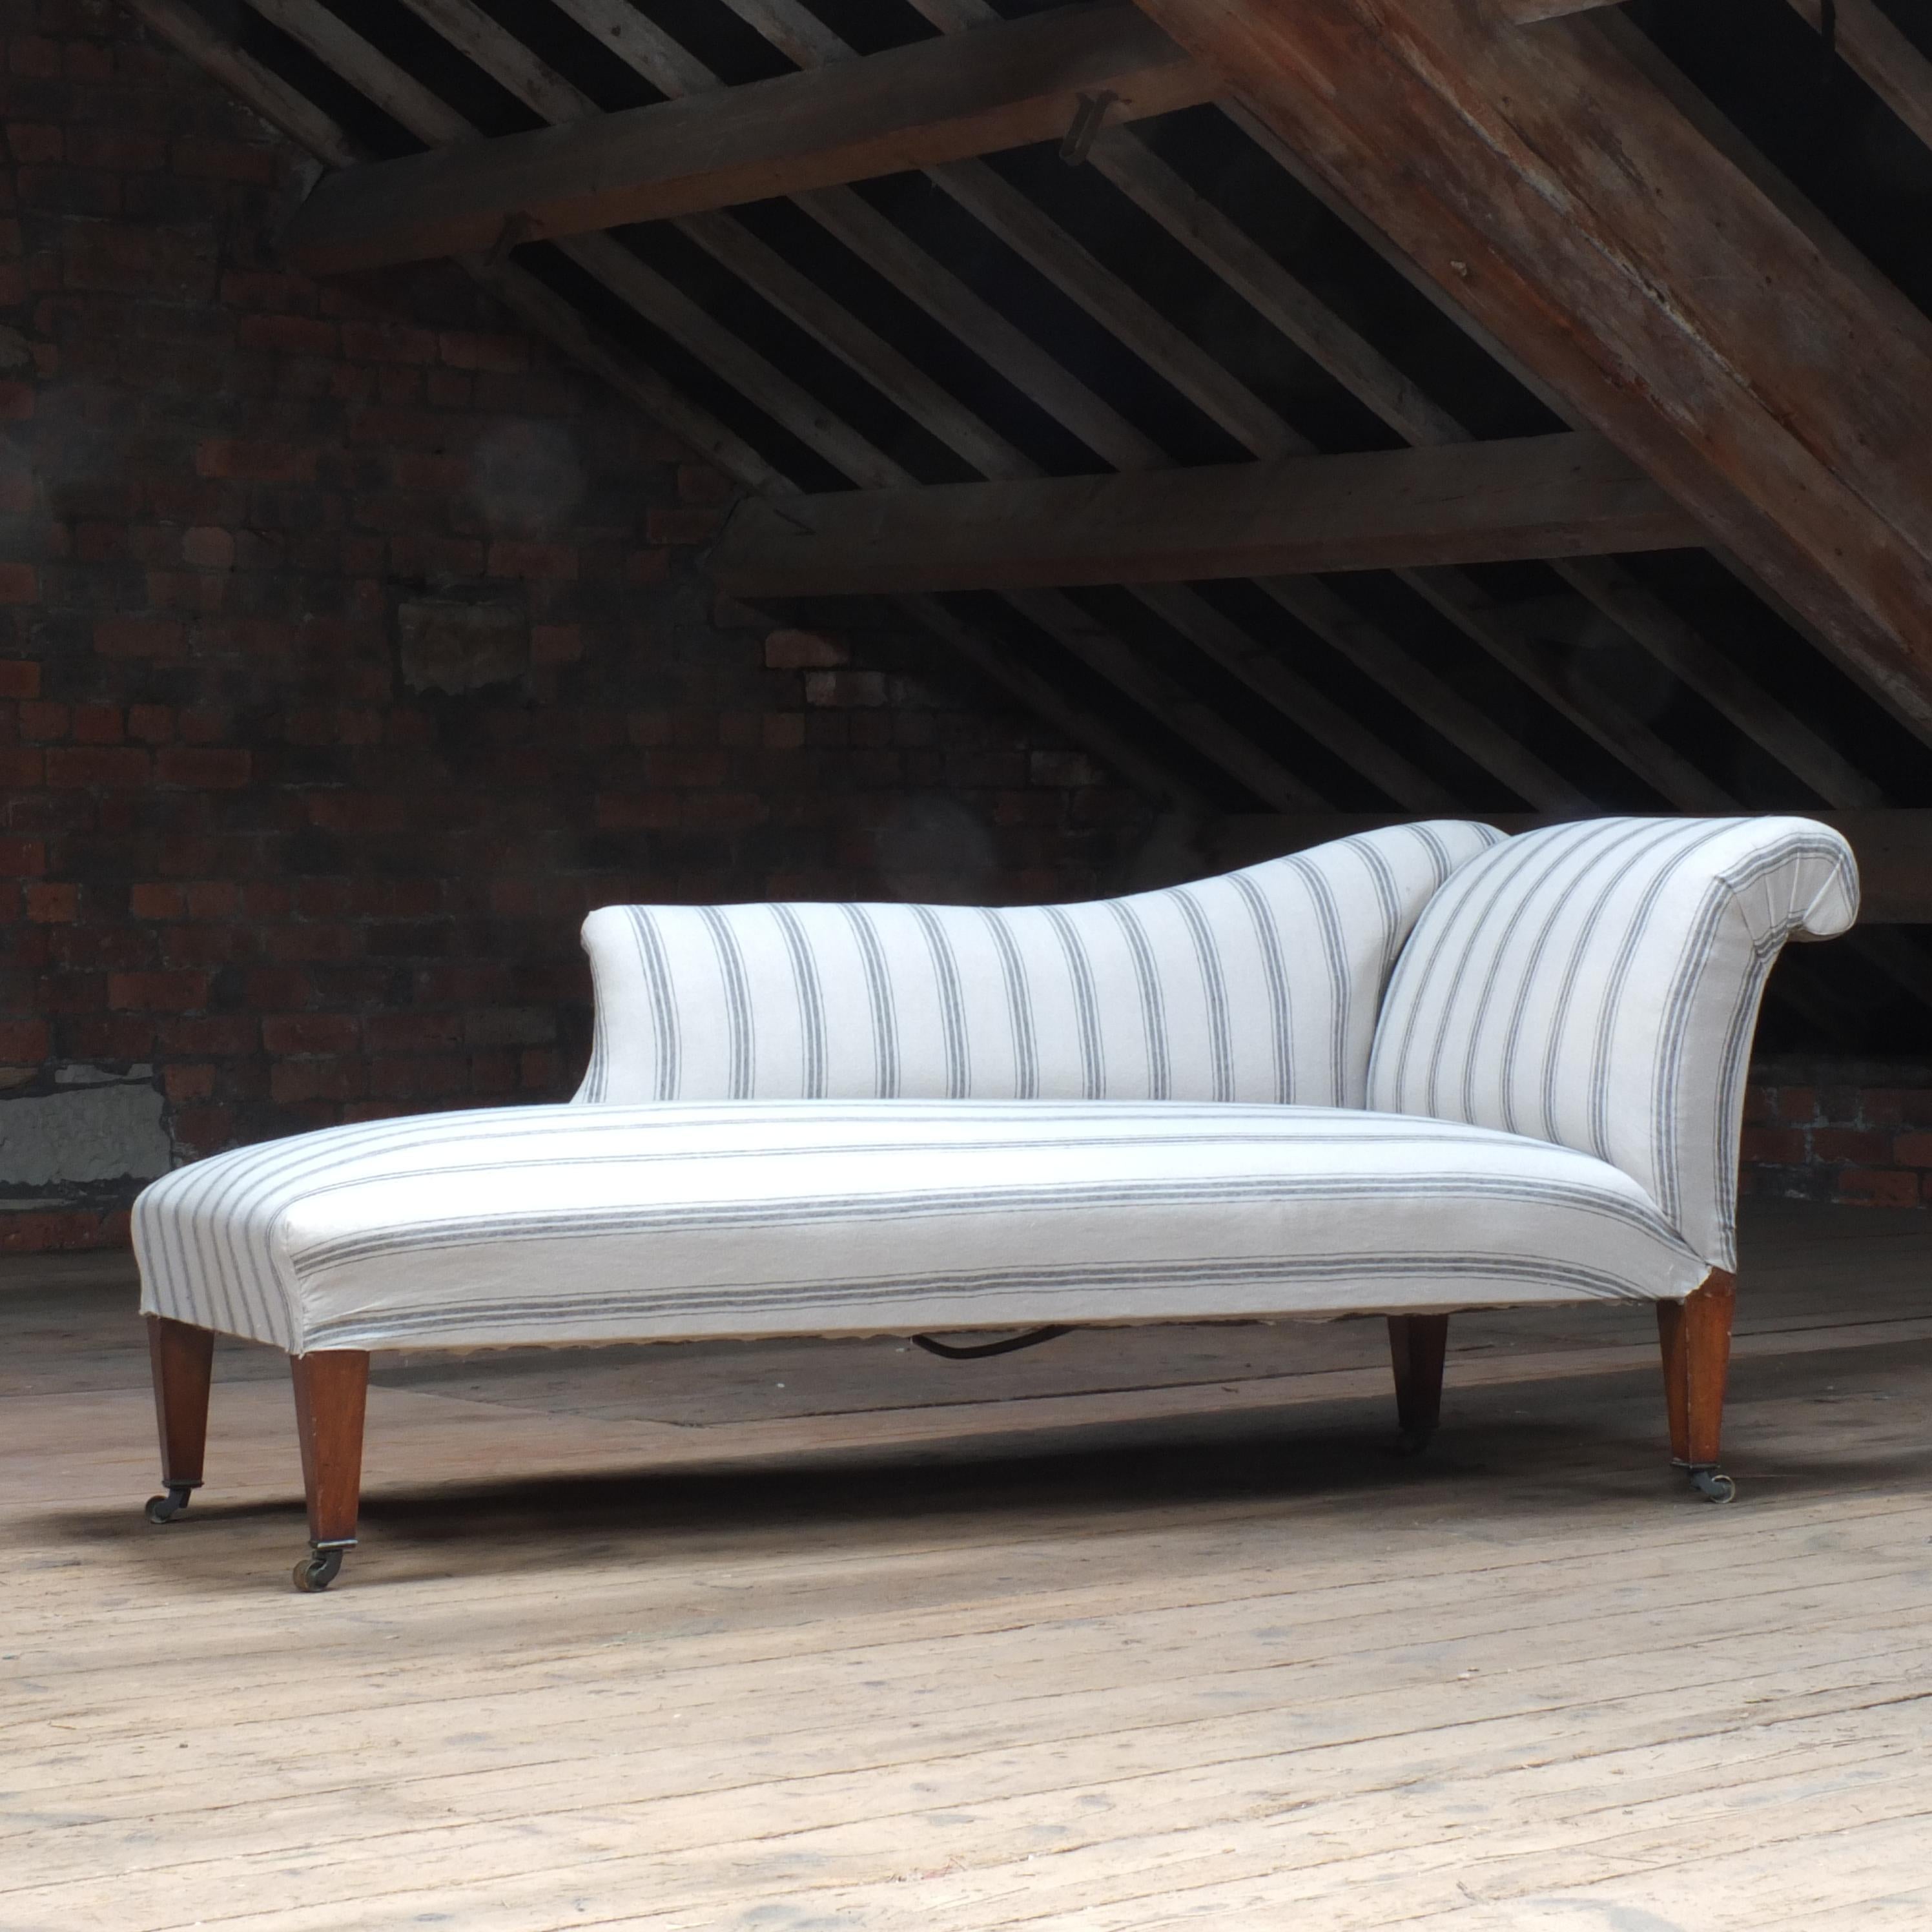 A large late 19th century chaise lounge raised on 4 square tapered legs with good quality original brass castors. In good solid structural condition throughout and just needing upholstery. 

The current fabric has been loosely fitted for